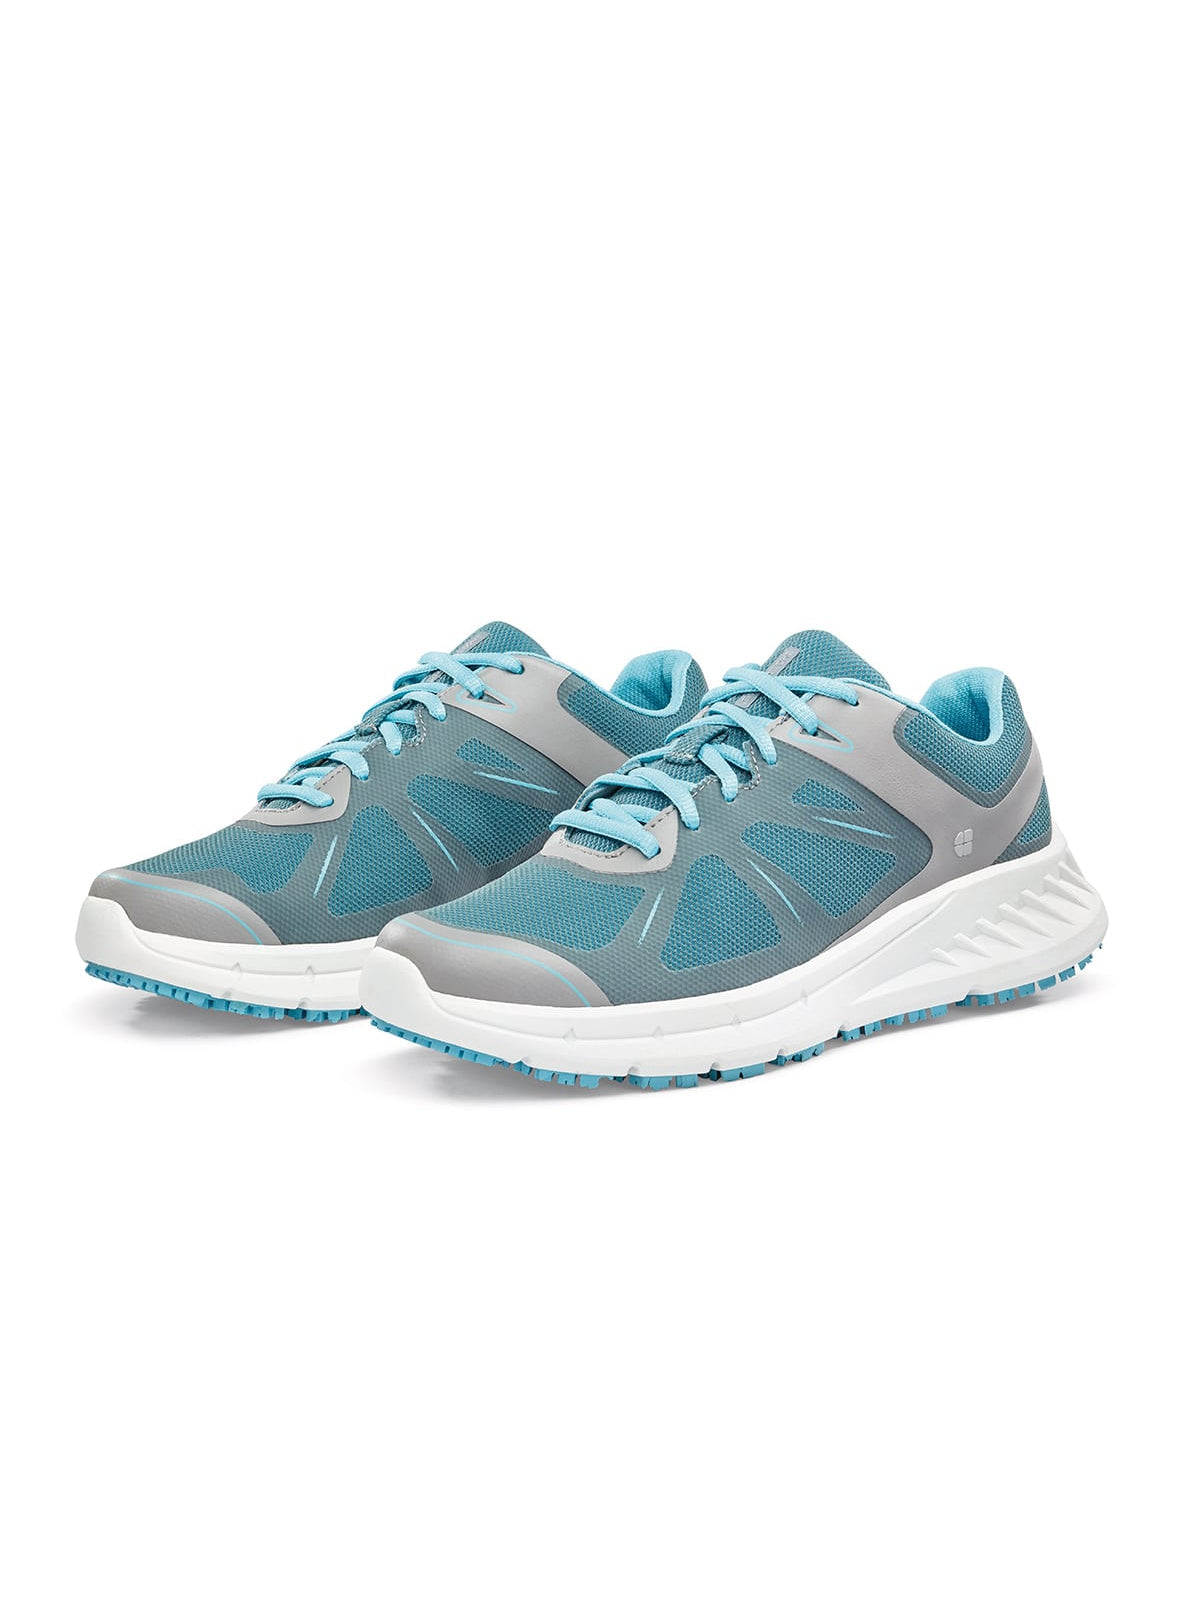 Women's Work Shoe Vitality II Blue by Shoes For Crews -  ChefsCotton